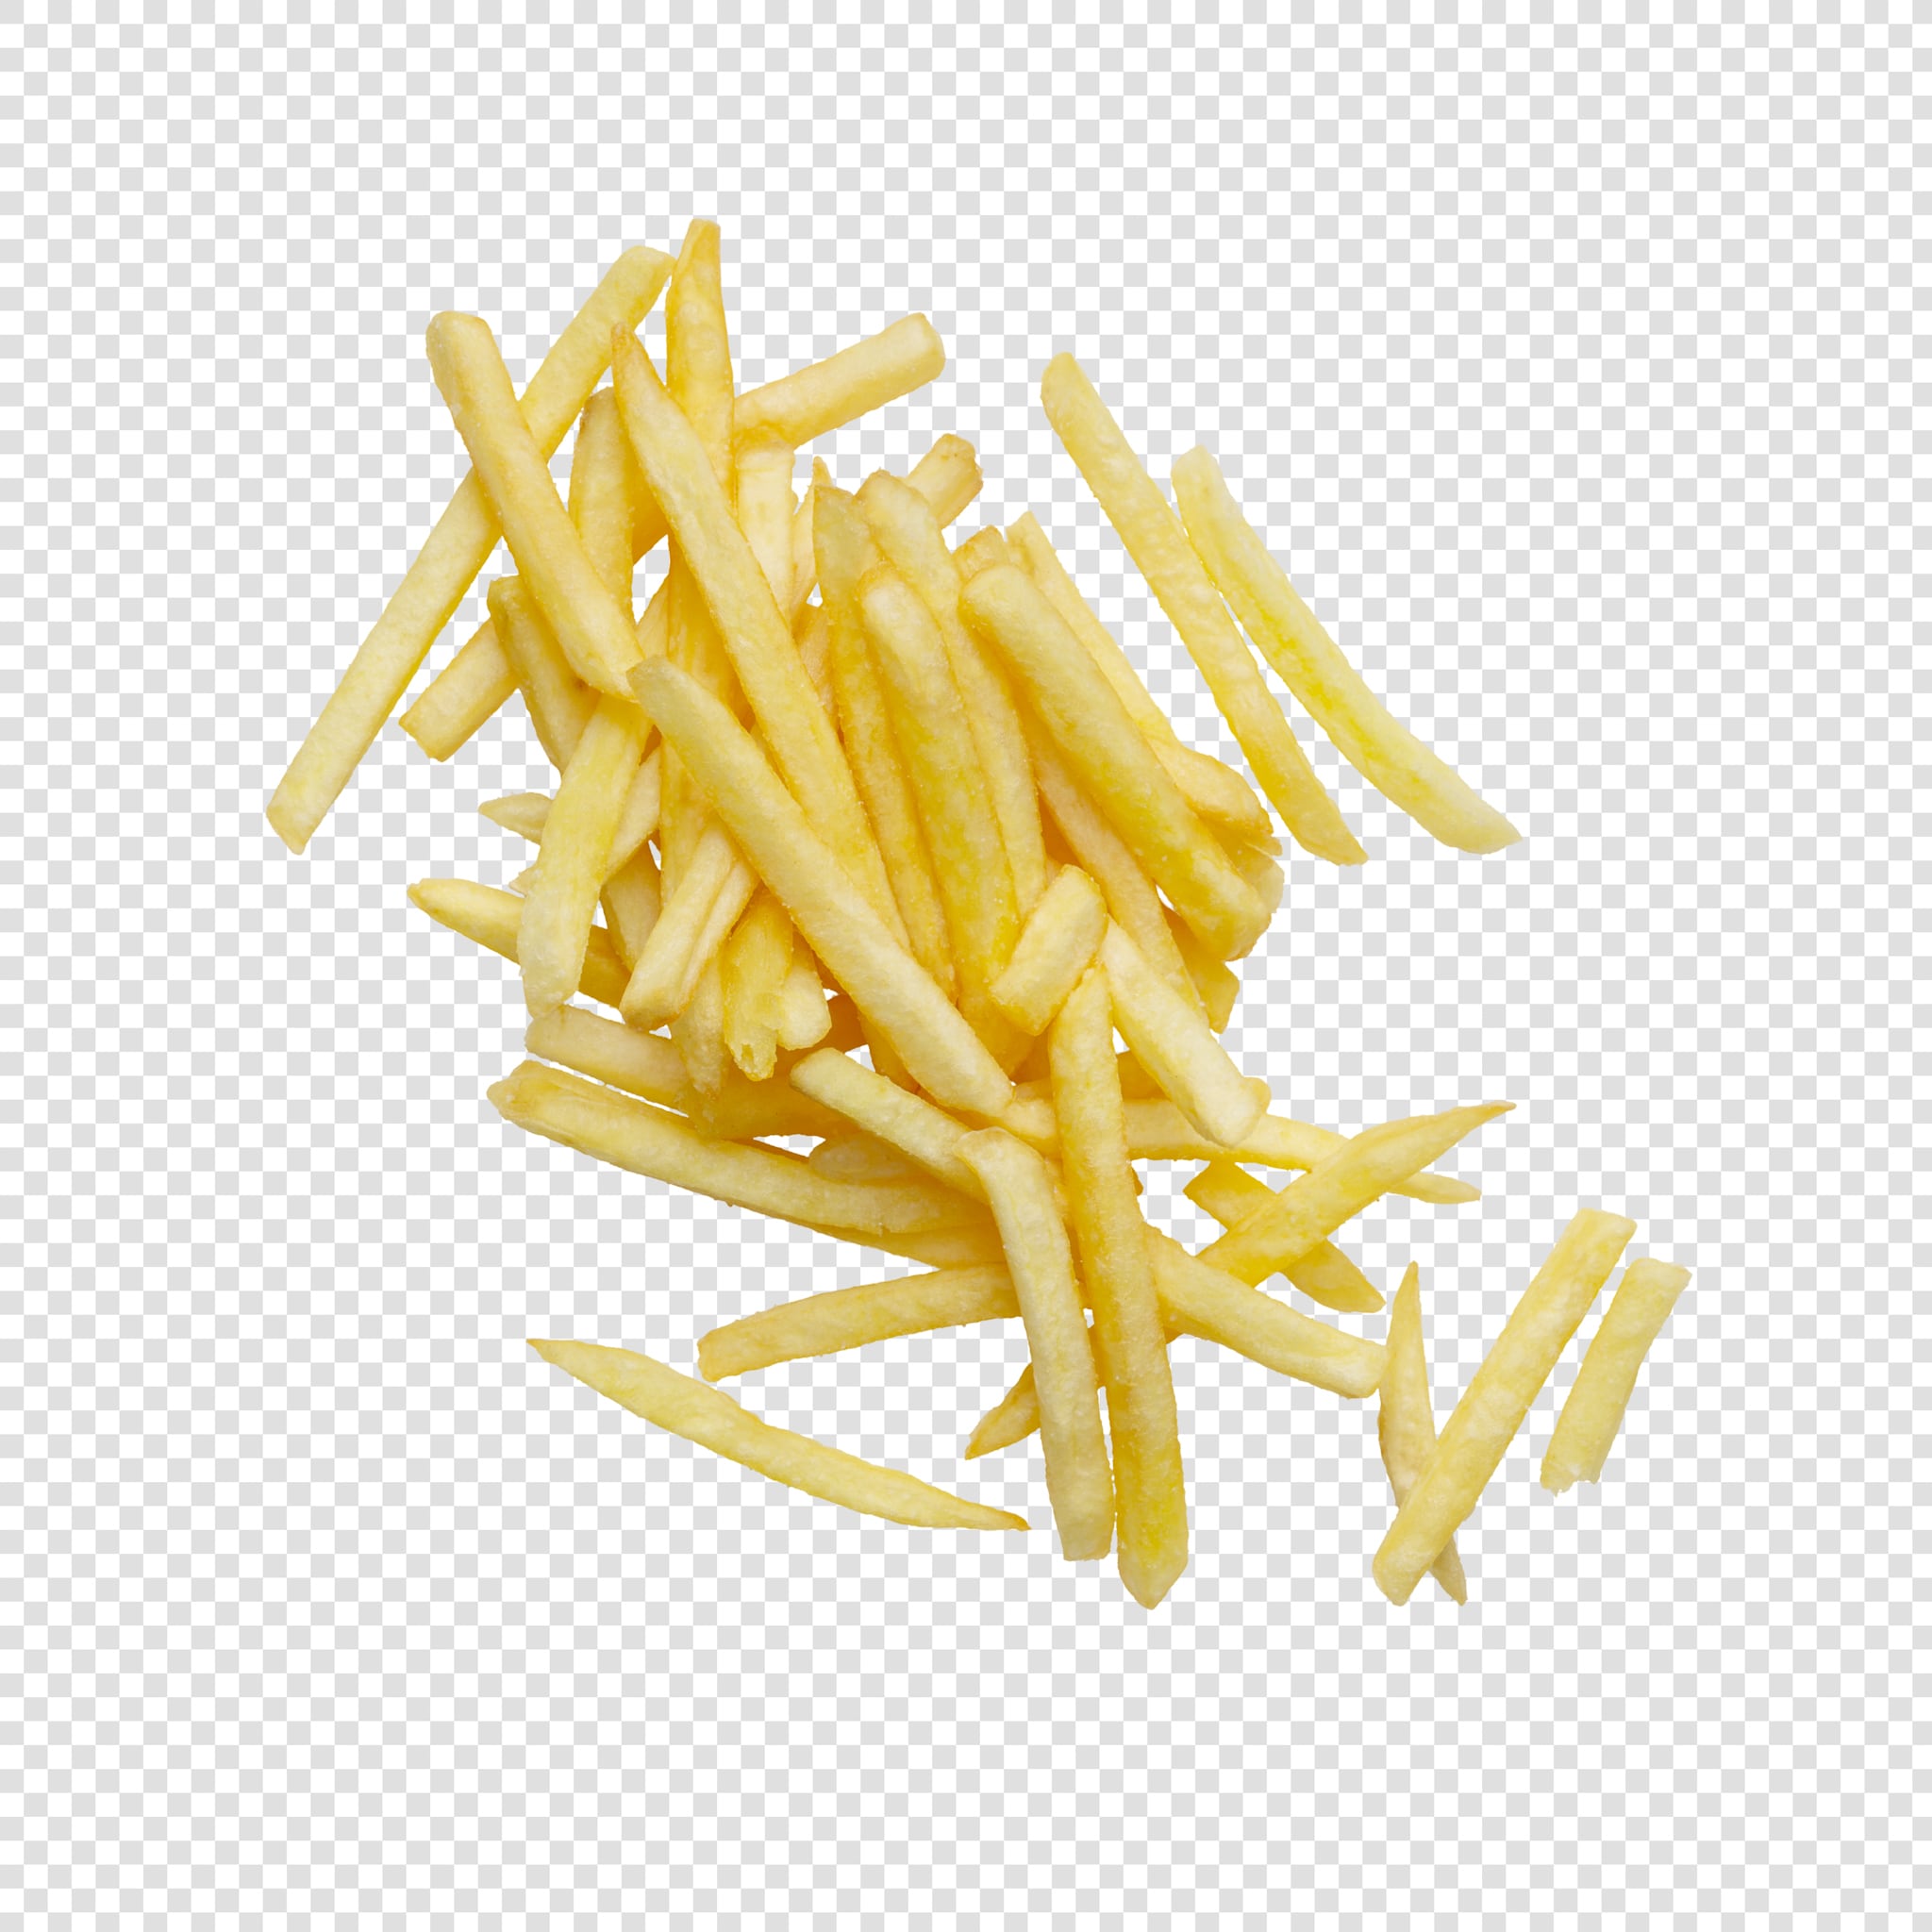 Isolated Fries psd image